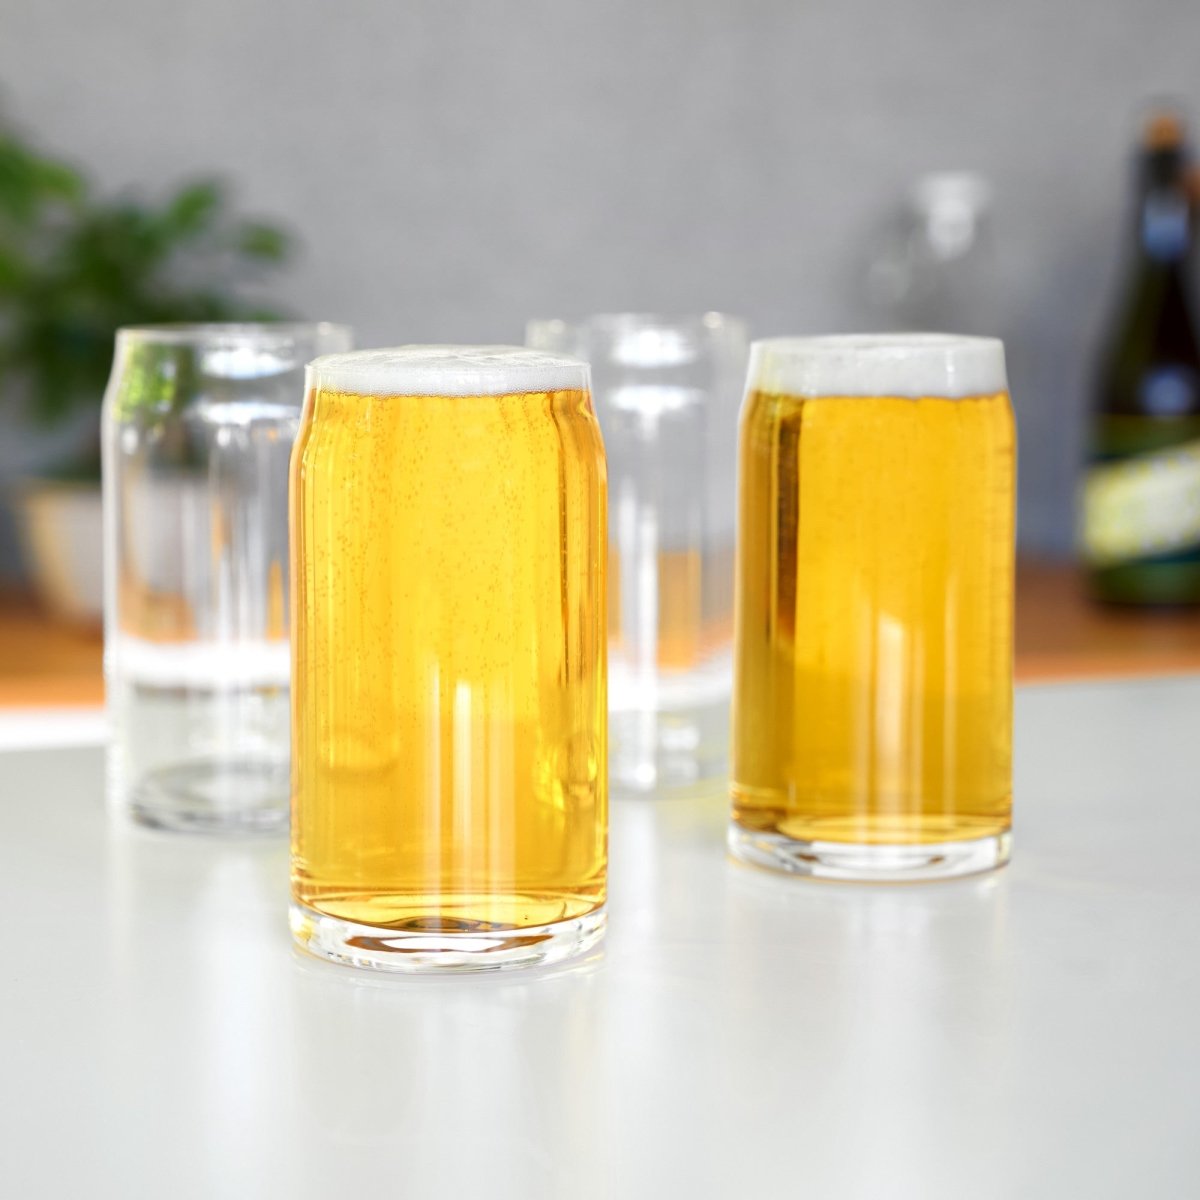 https://cdn.shopify.com/s/files/1/0275/1876/3088/products/beer-can-pint-glasses-set-of-4-189349_1445x.jpg?v=1666386390